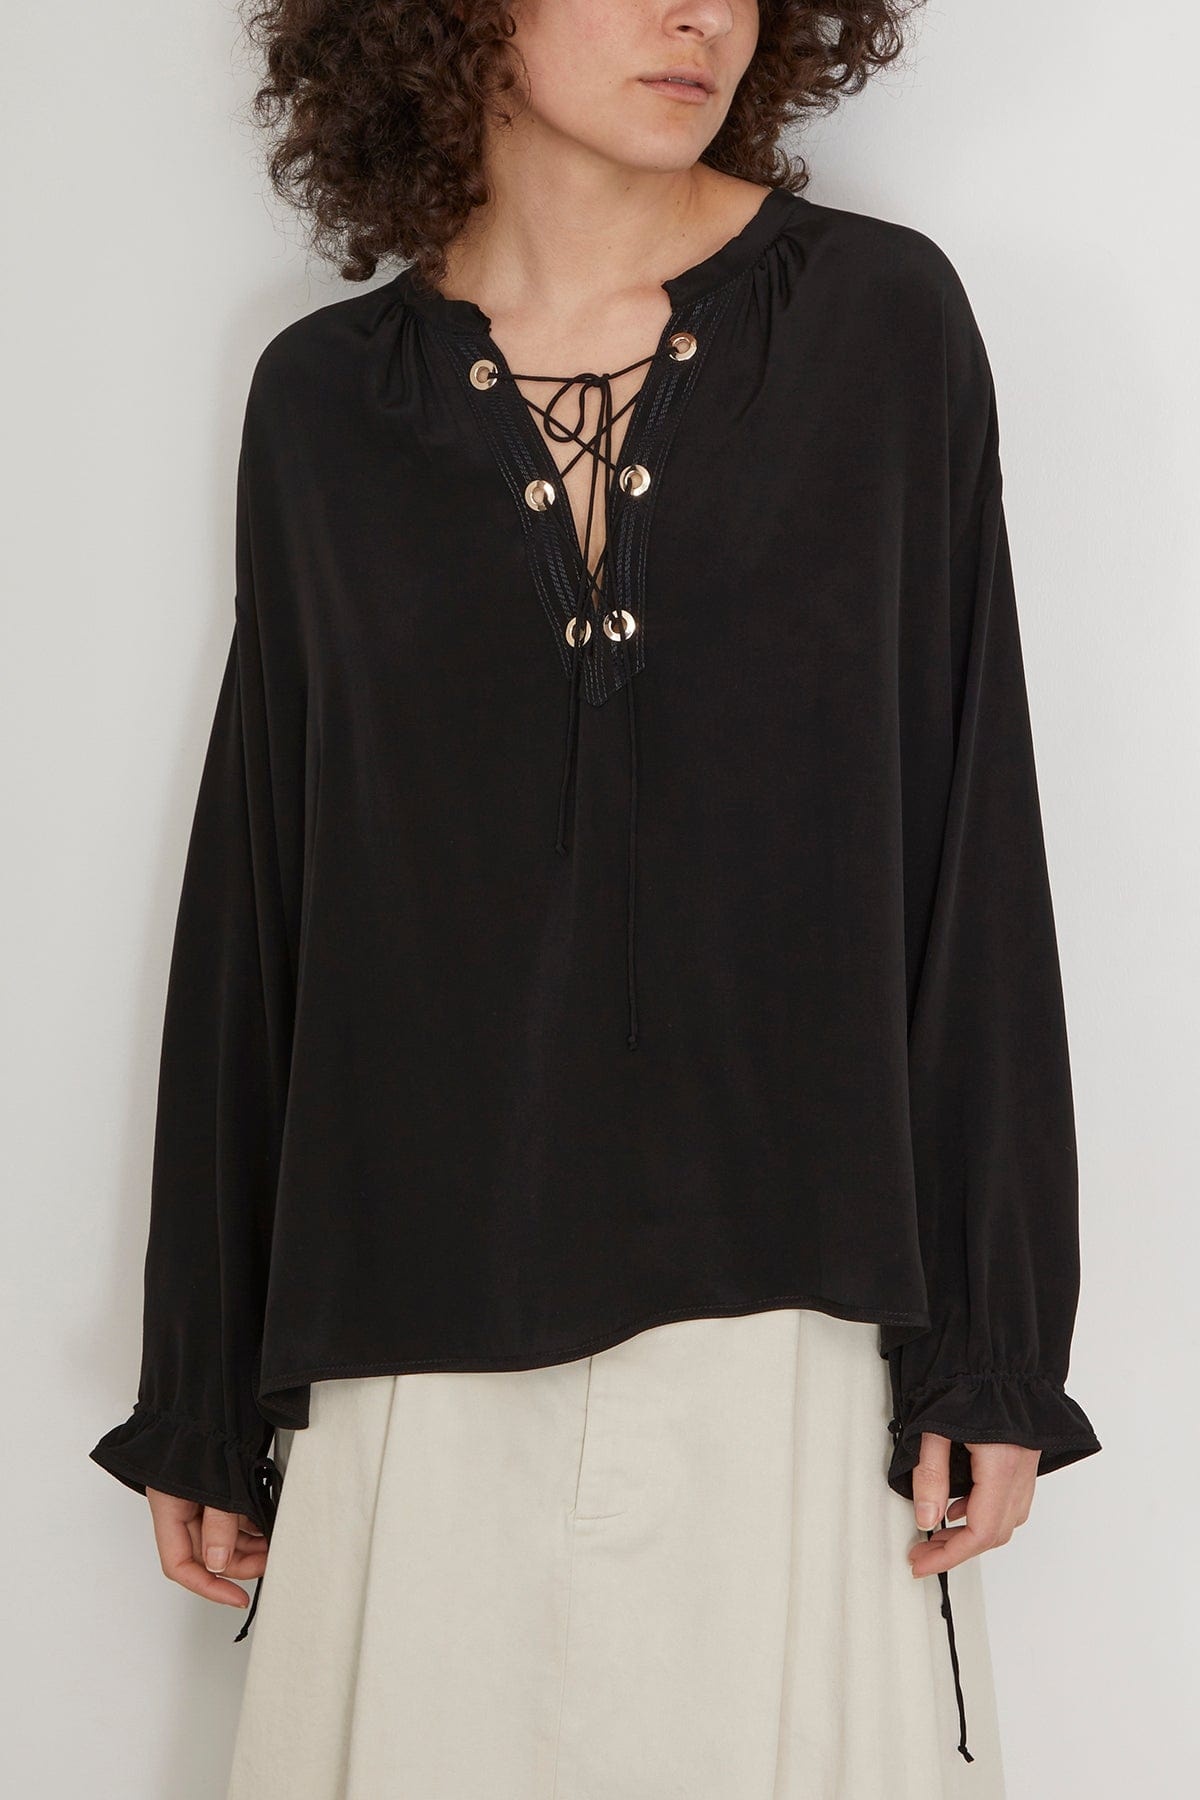 Sophisticated Volumes Blouse in Pure Black - 3